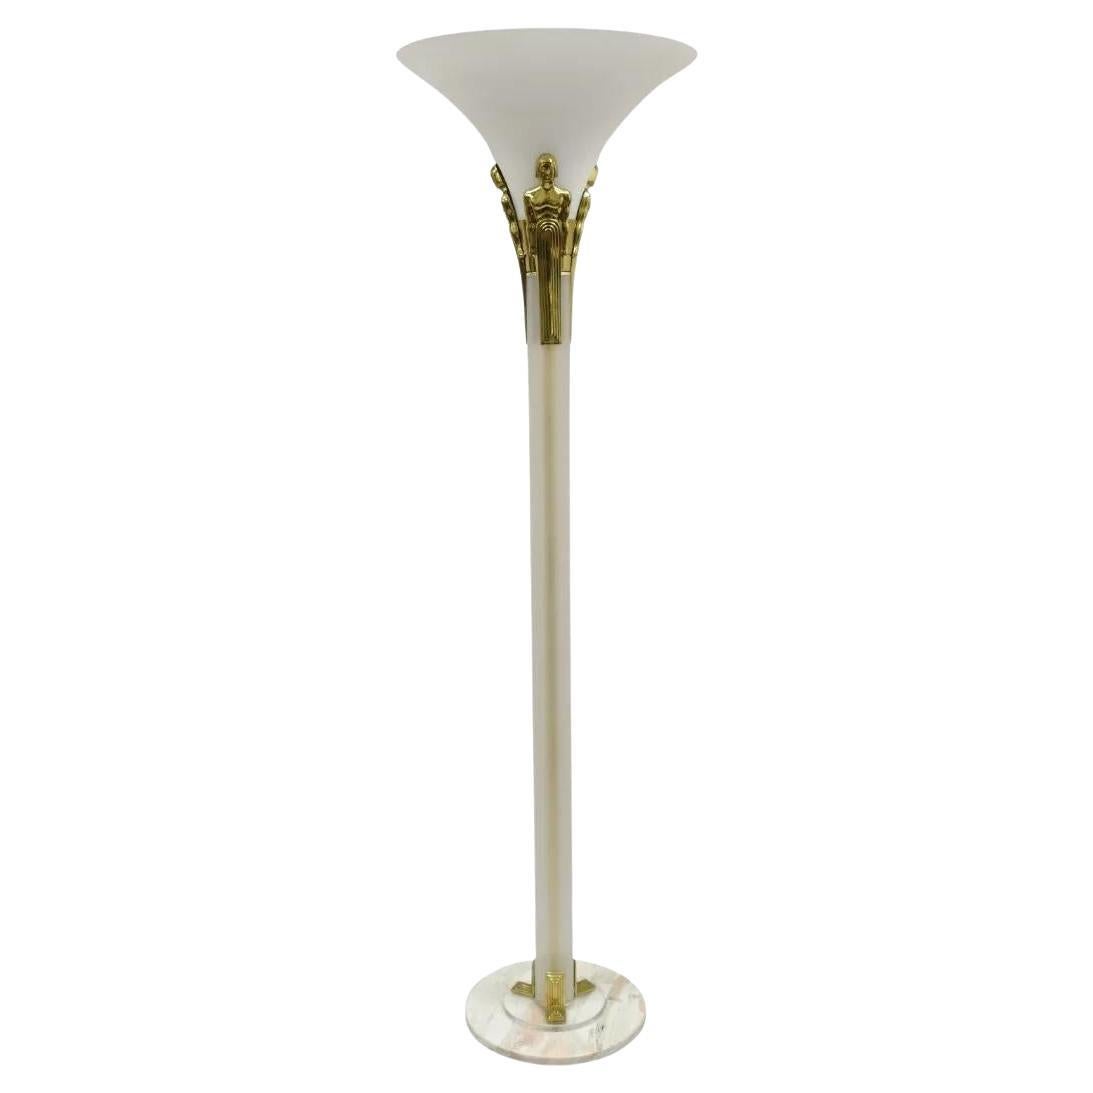 Vintage Art Deco Style Figural Frosted Acrylic and Glass Torchiere Floor Lamp For Sale